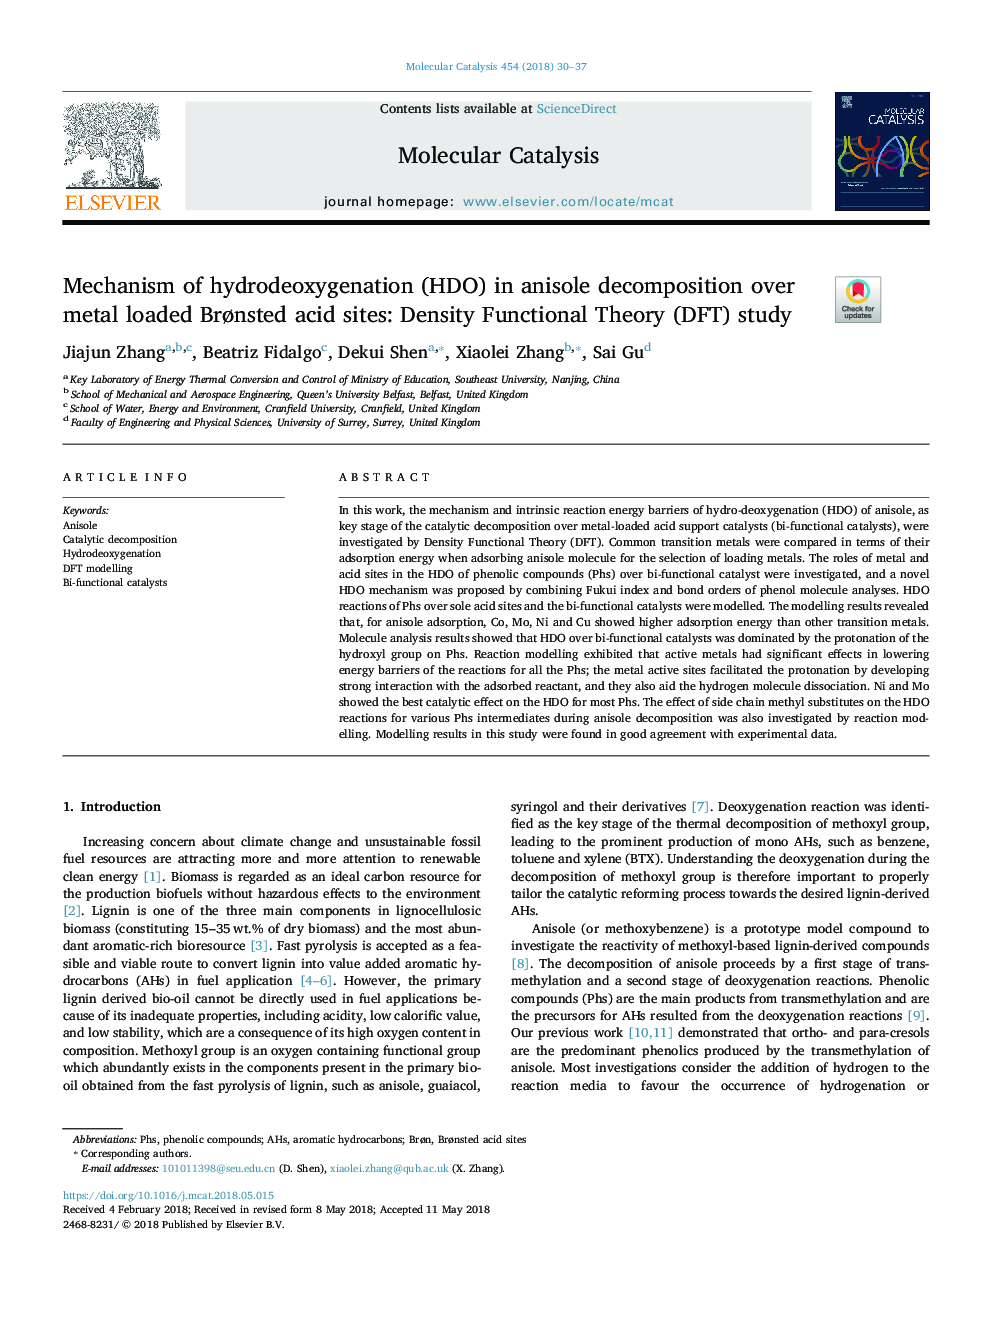 Mechanism of hydrodeoxygenation (HDO) in anisole decomposition over metal loaded BrÃ¸nsted acid sites: Density Functional Theory (DFT) study